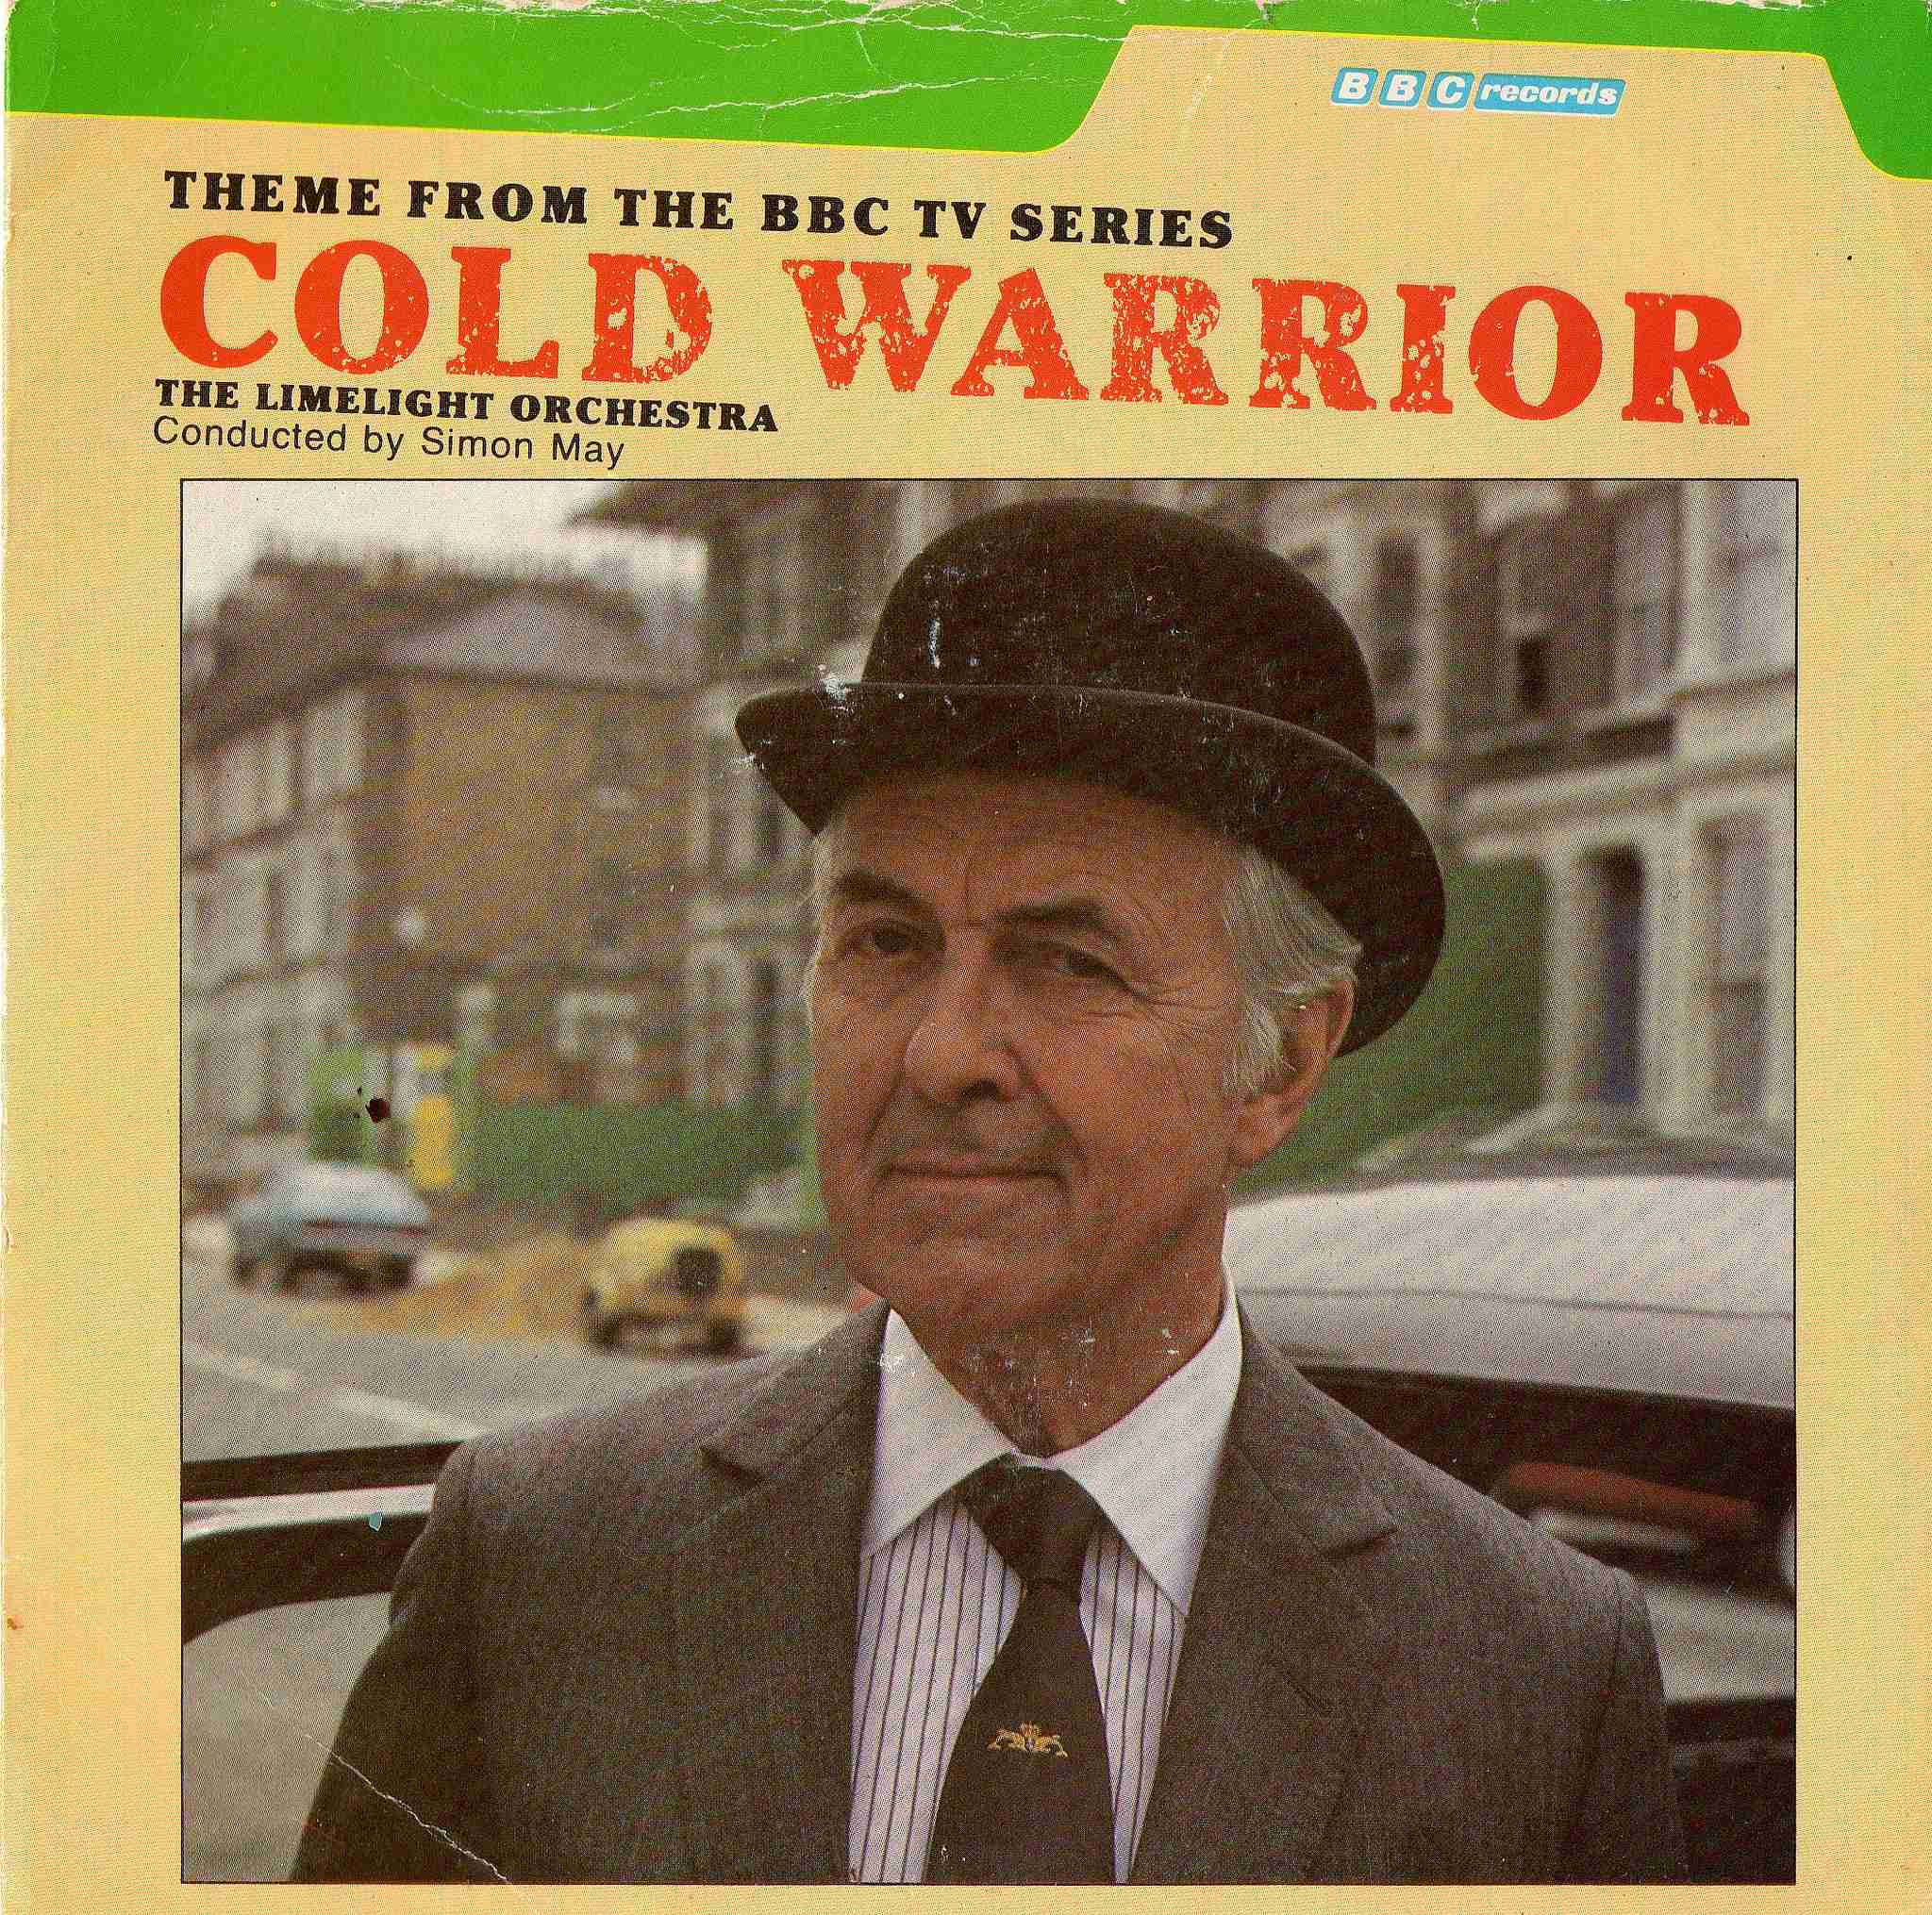 Picture of RESL 149 Cold warrior by artist Simon May / Leslie Osborne / The Limelight Orchestra from the BBC records and Tapes library